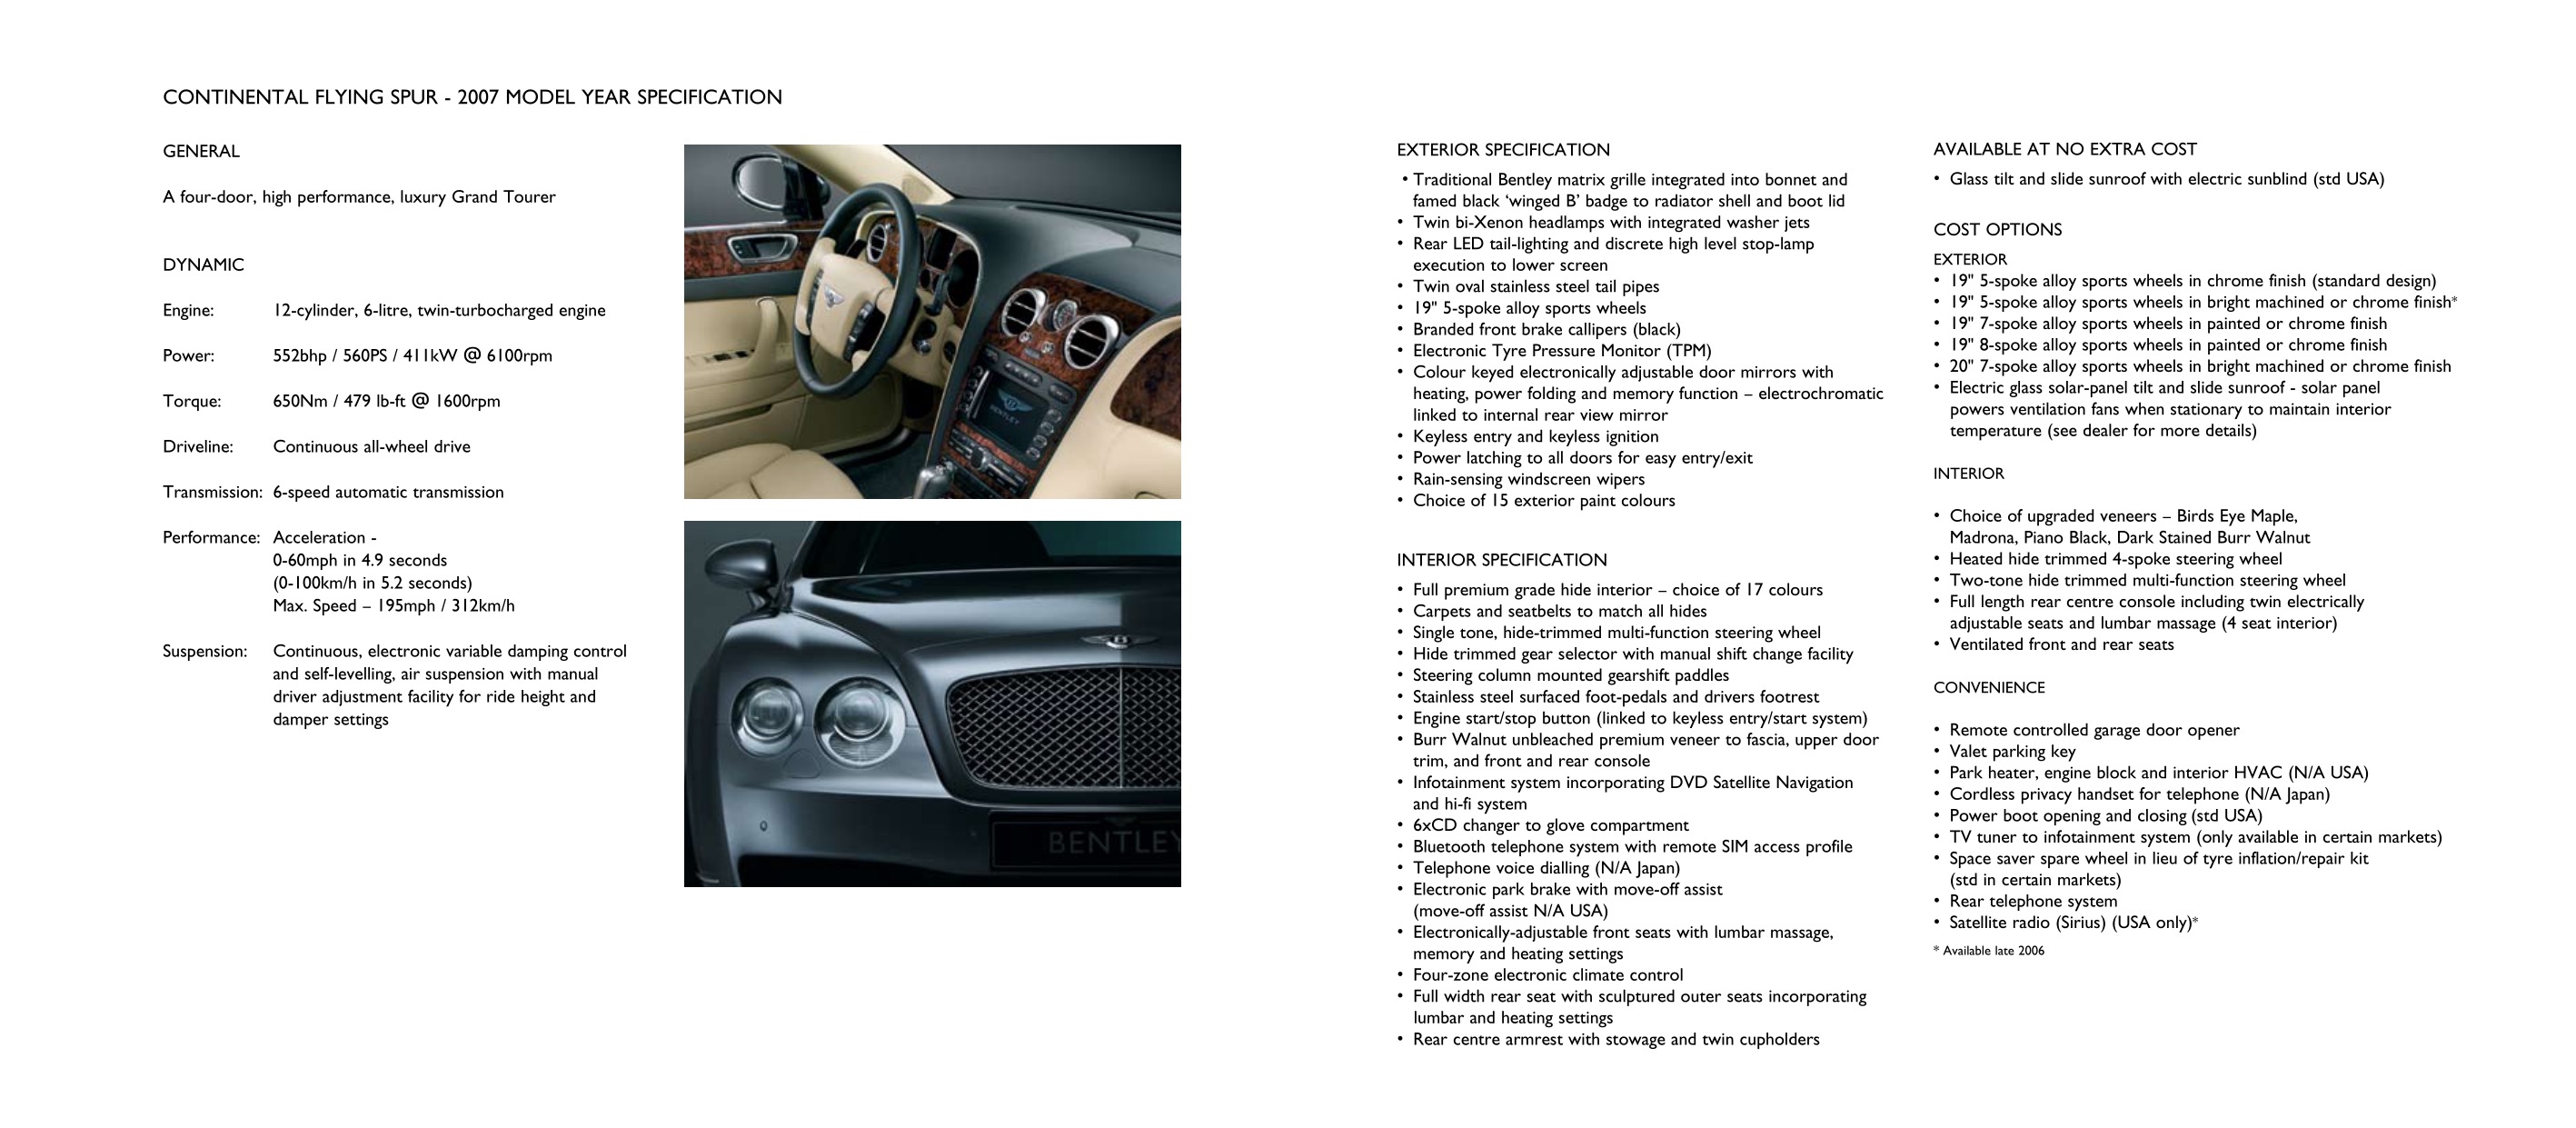 2007 Bentley Continental Flying Spur Brochure Page 16